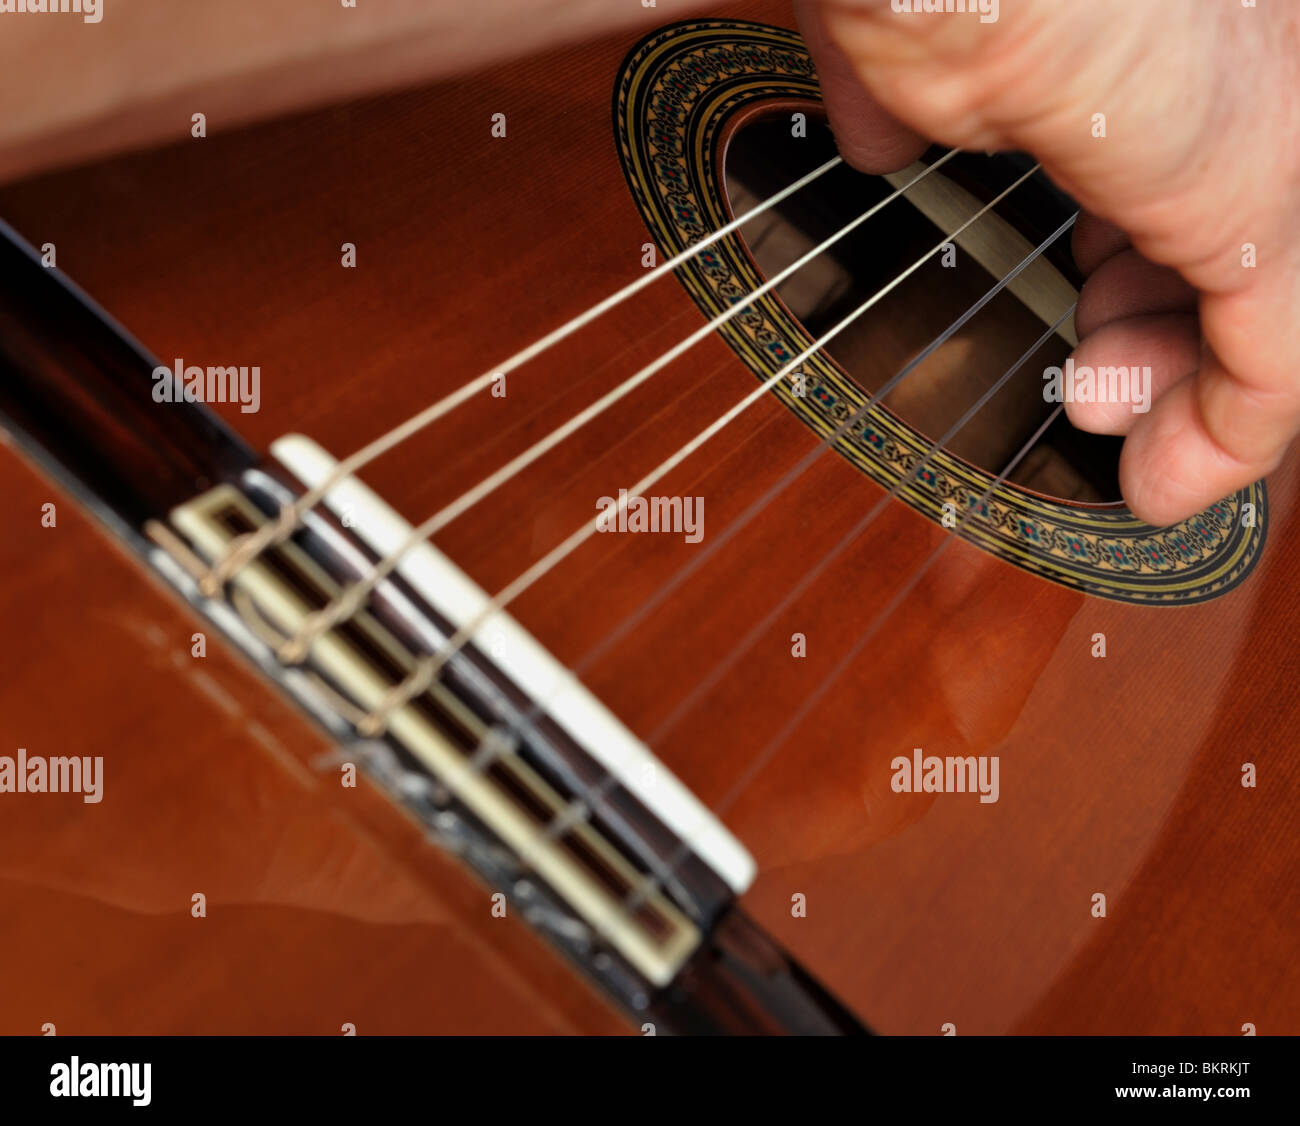 Learn to play Classical Guitar Stock Photo